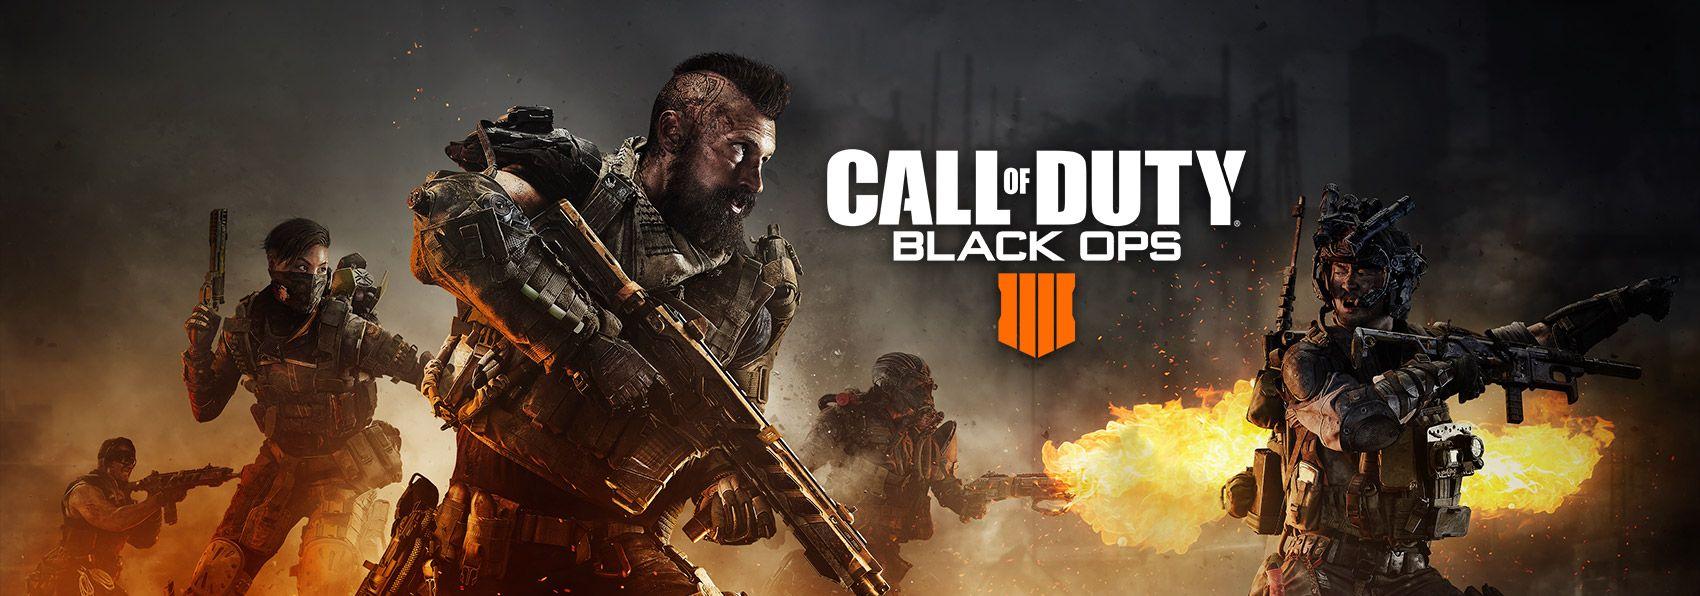 News Official Black Ops 4 wallpaper released 1700x596